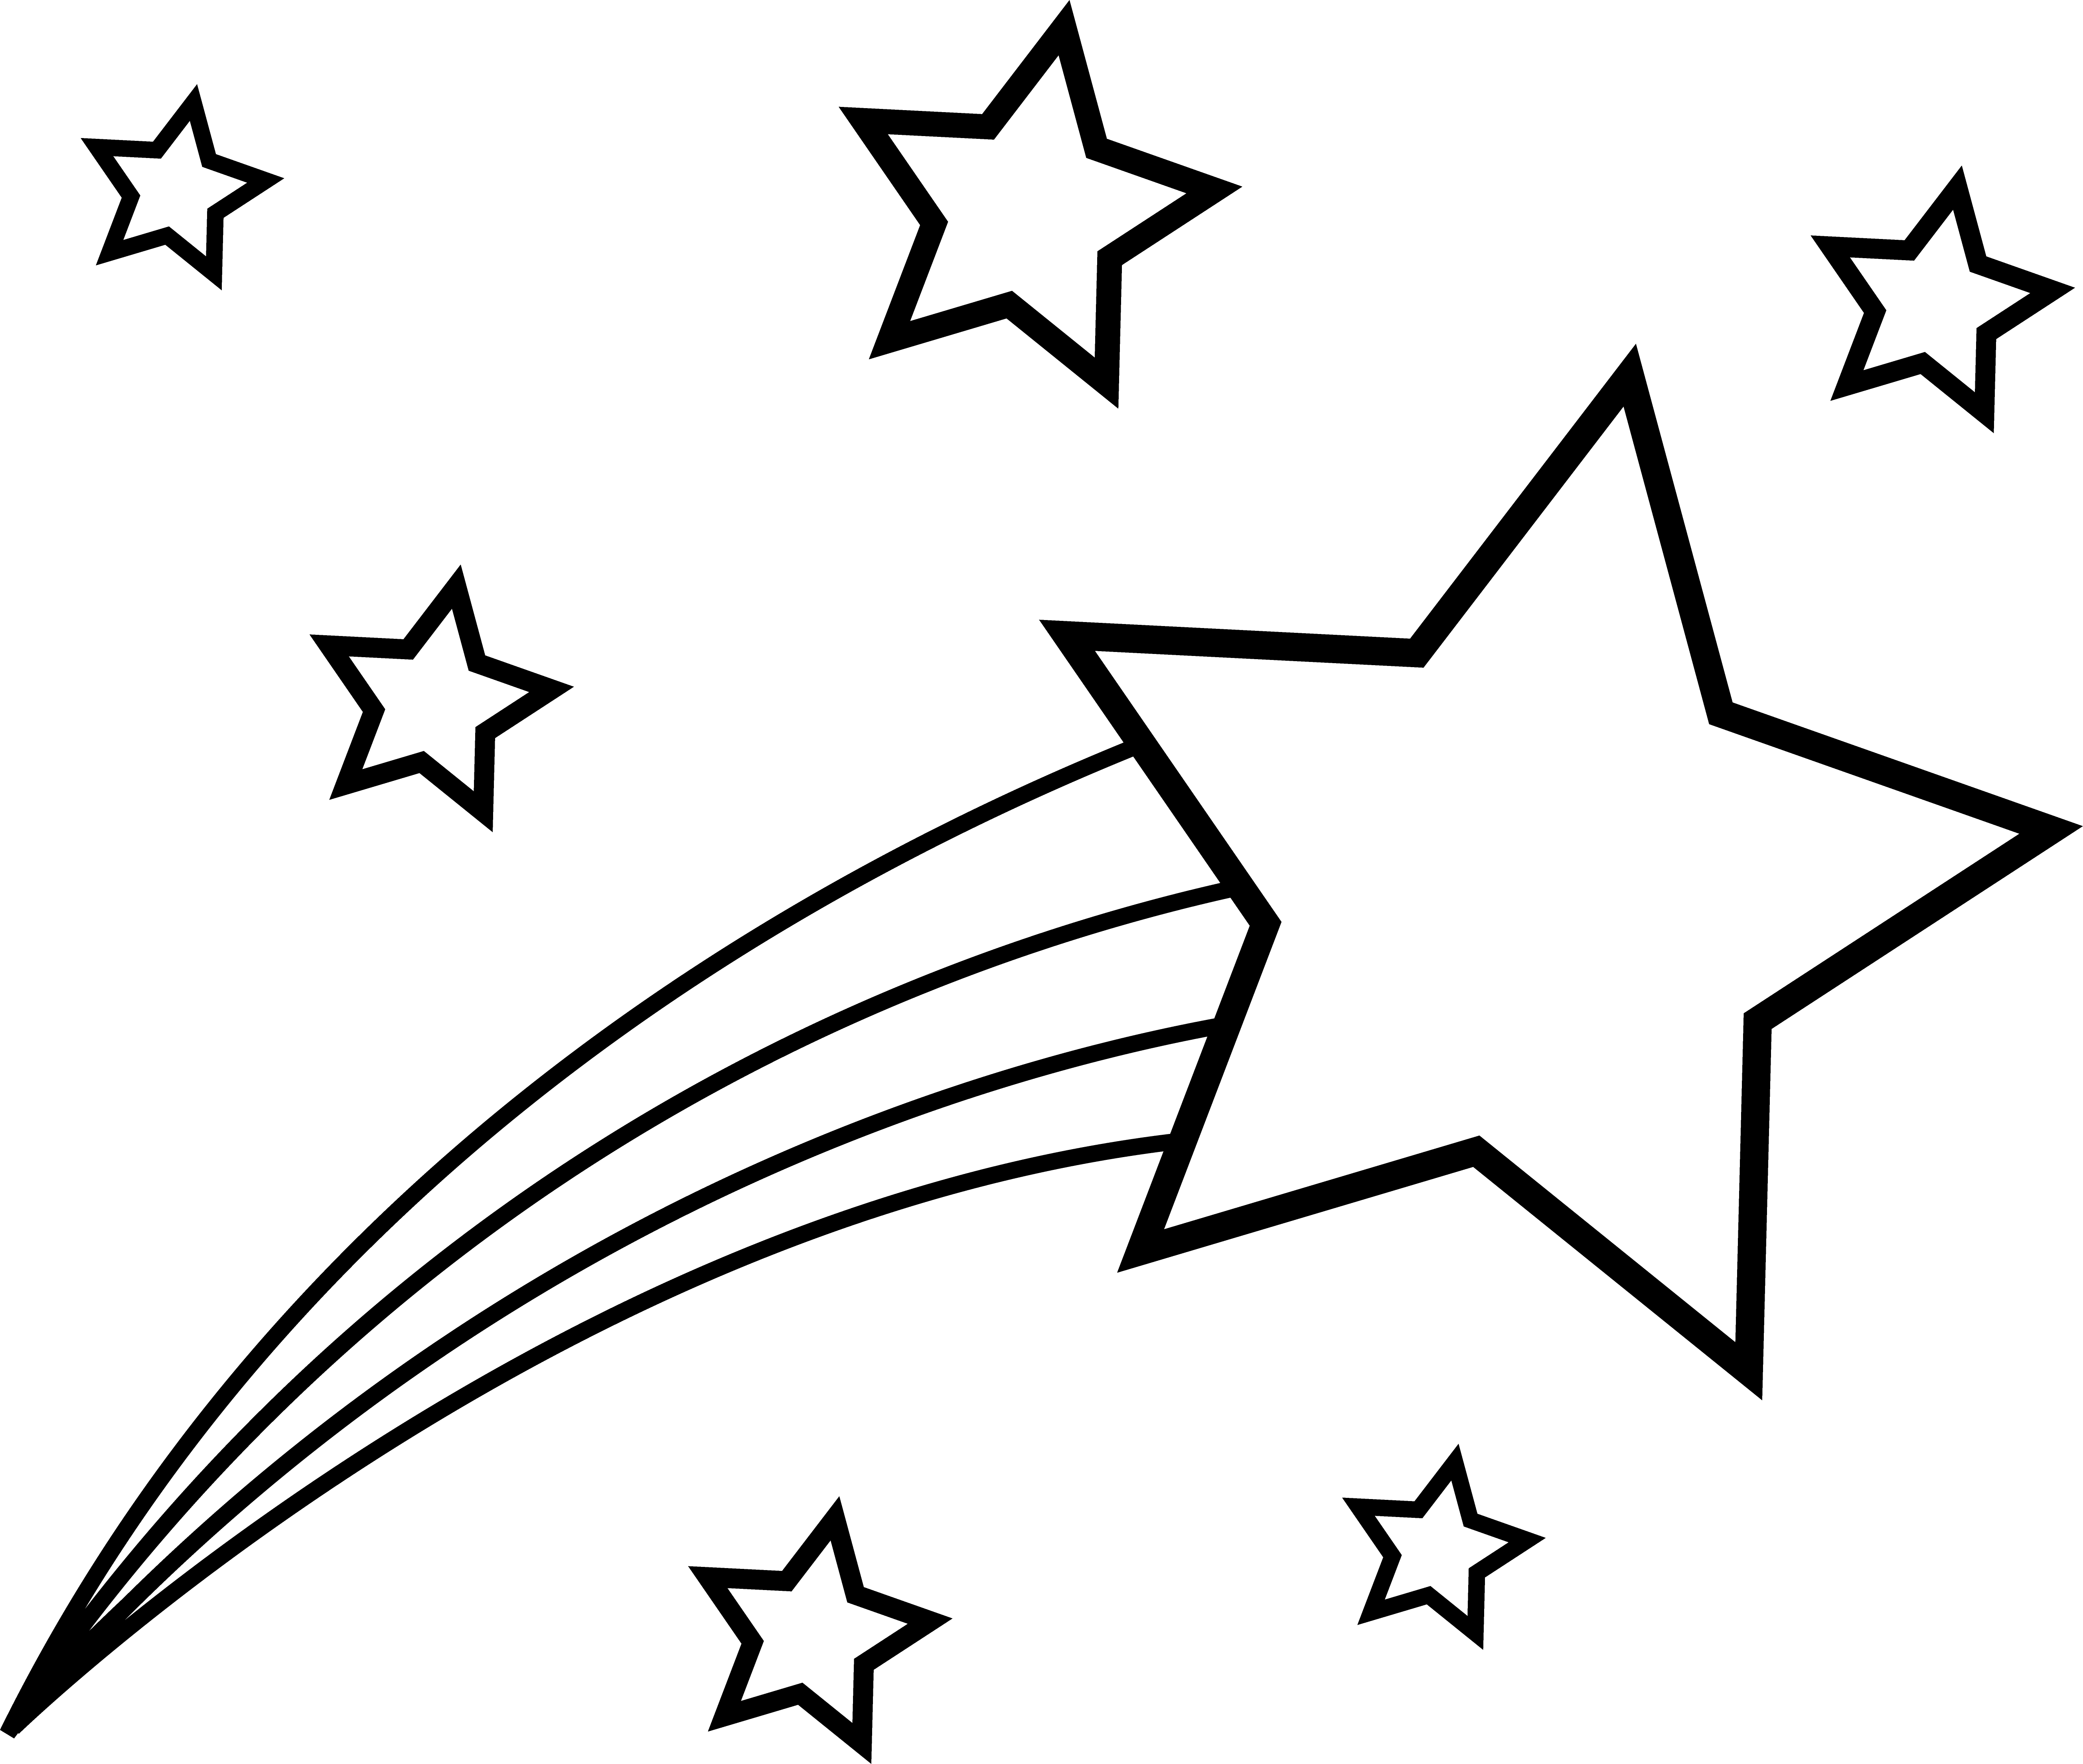 Perfect Star Outline - ClipArt Best